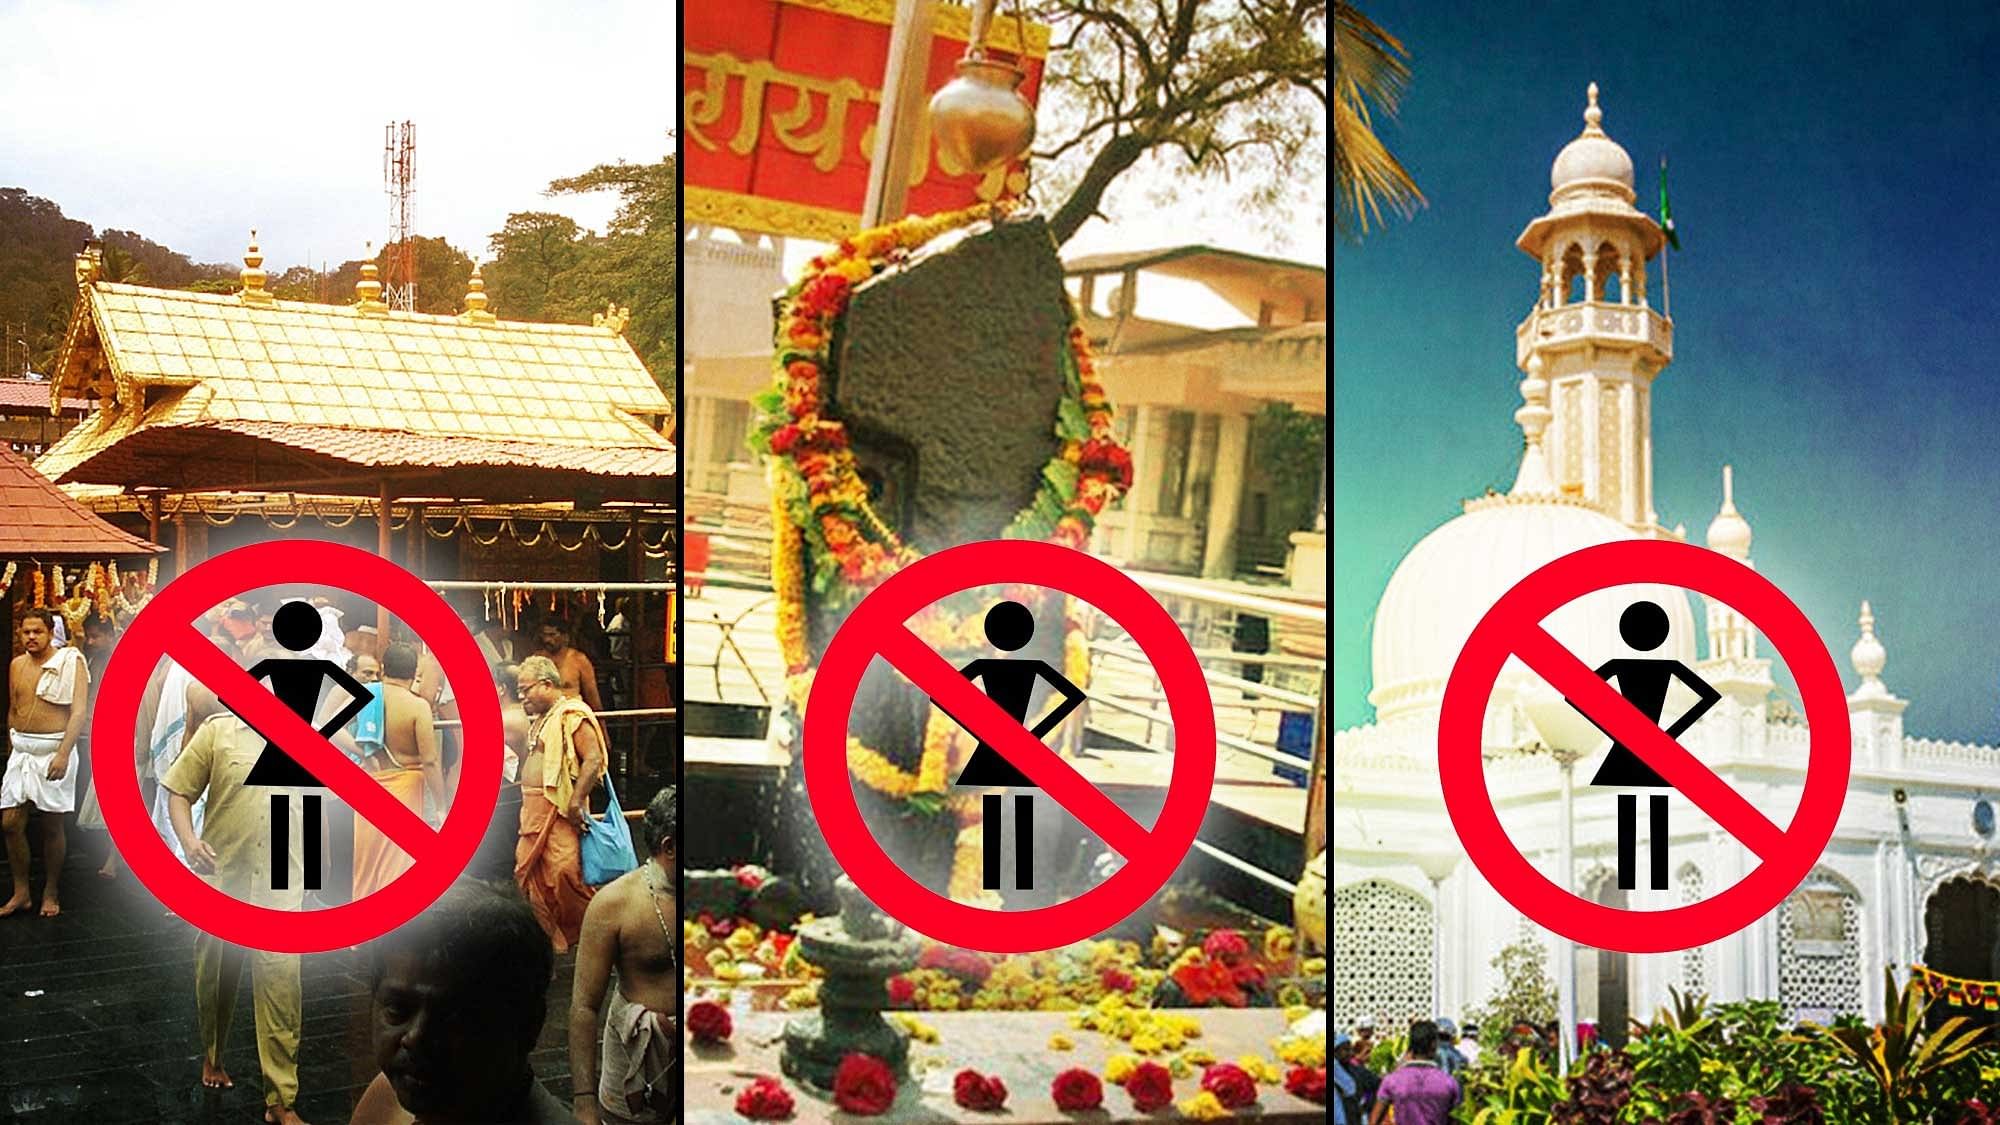 Women are banned from entering Sabarimala, Shani Temple, and the Haji Ali dargah. (Photo:<b> The Quint</b>)